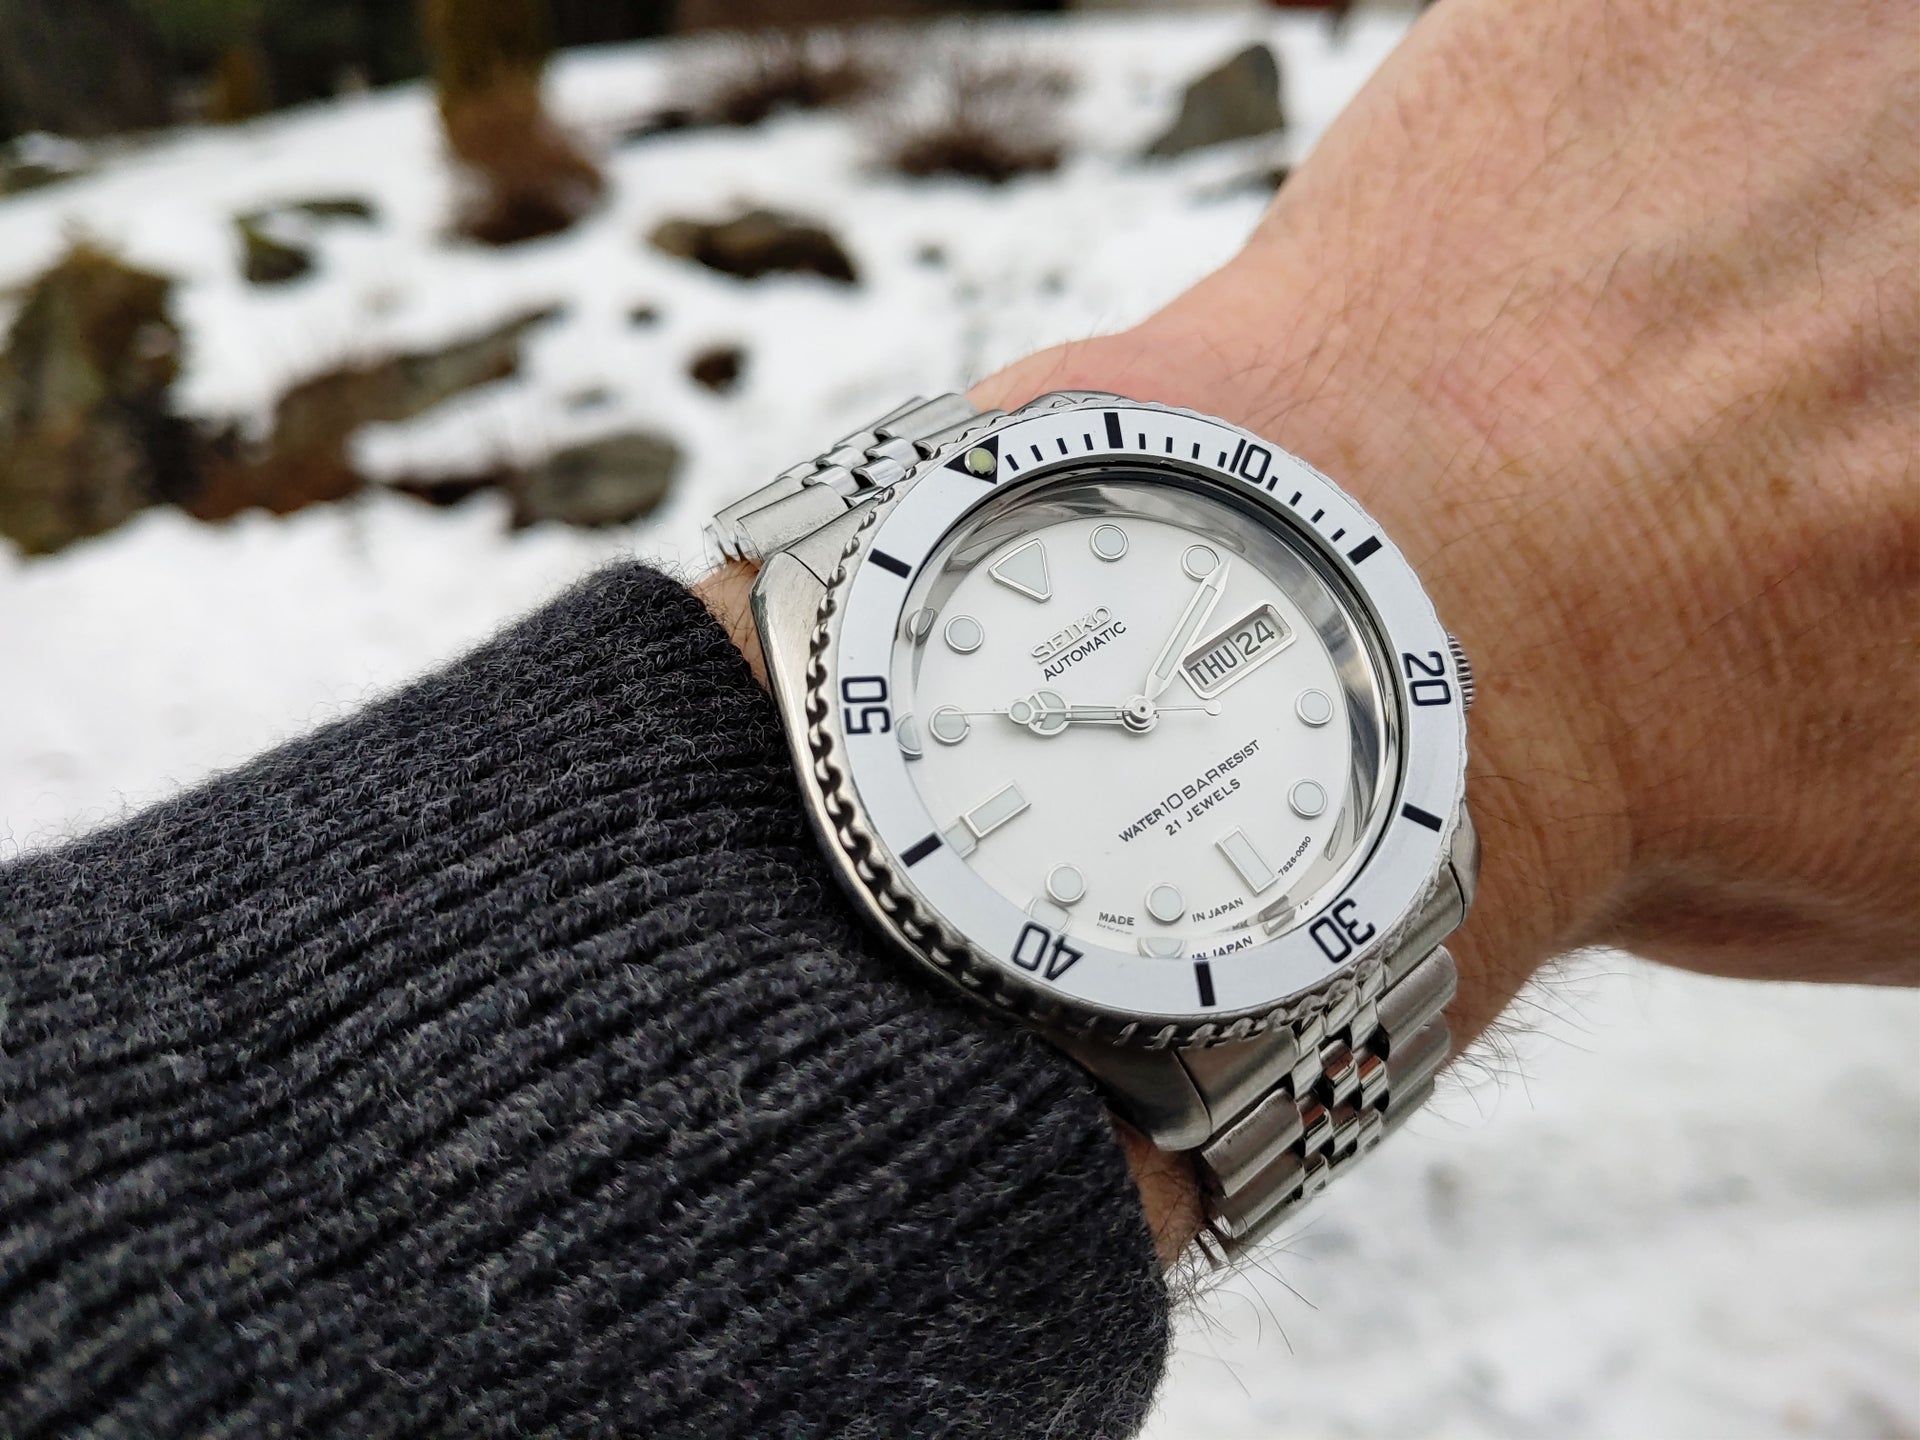 SOLD*** SKX007 "White World" Mod Automatic Diver Watch US & Canada*** WatchUSeek Watch Forums